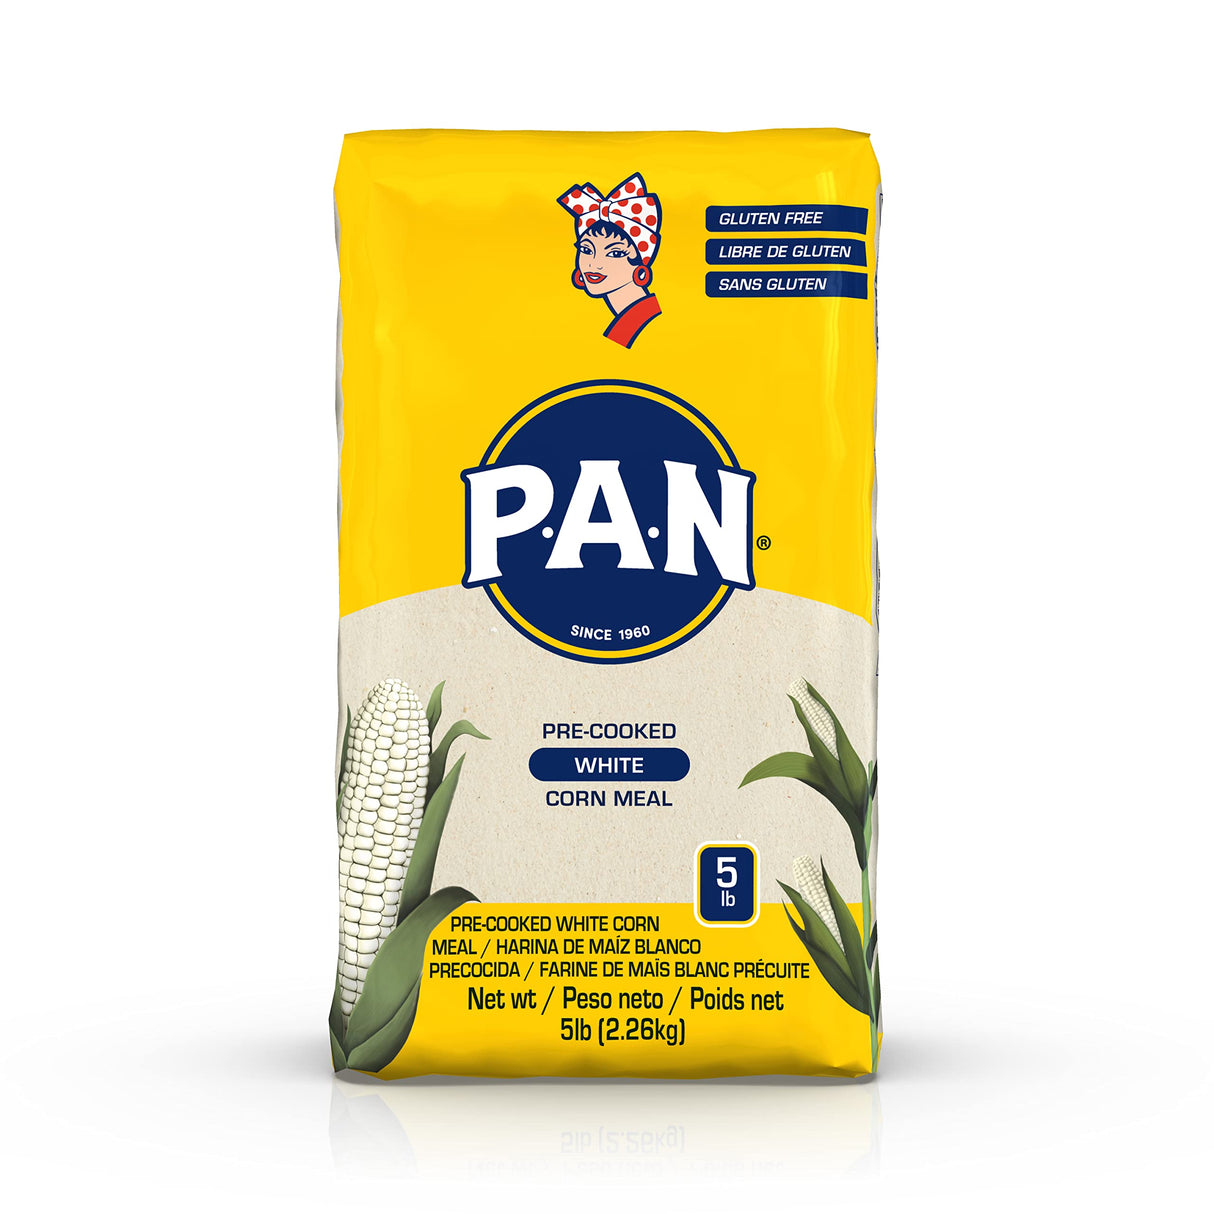 P.A.N Harina Blanca - Pre-cooked White Corn Meal 5LB